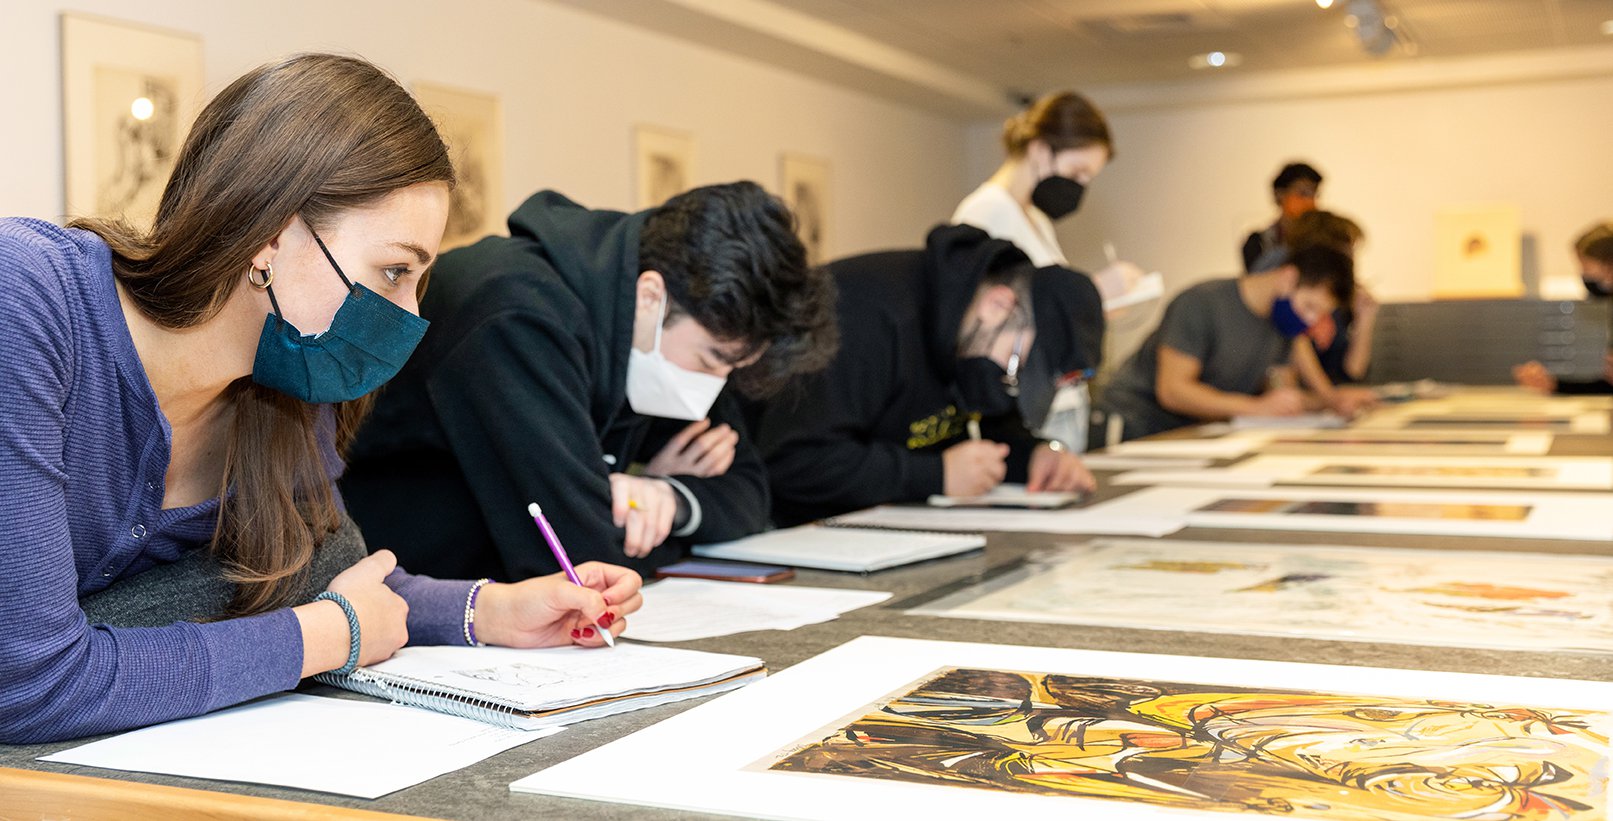 Students studying art work in a museum